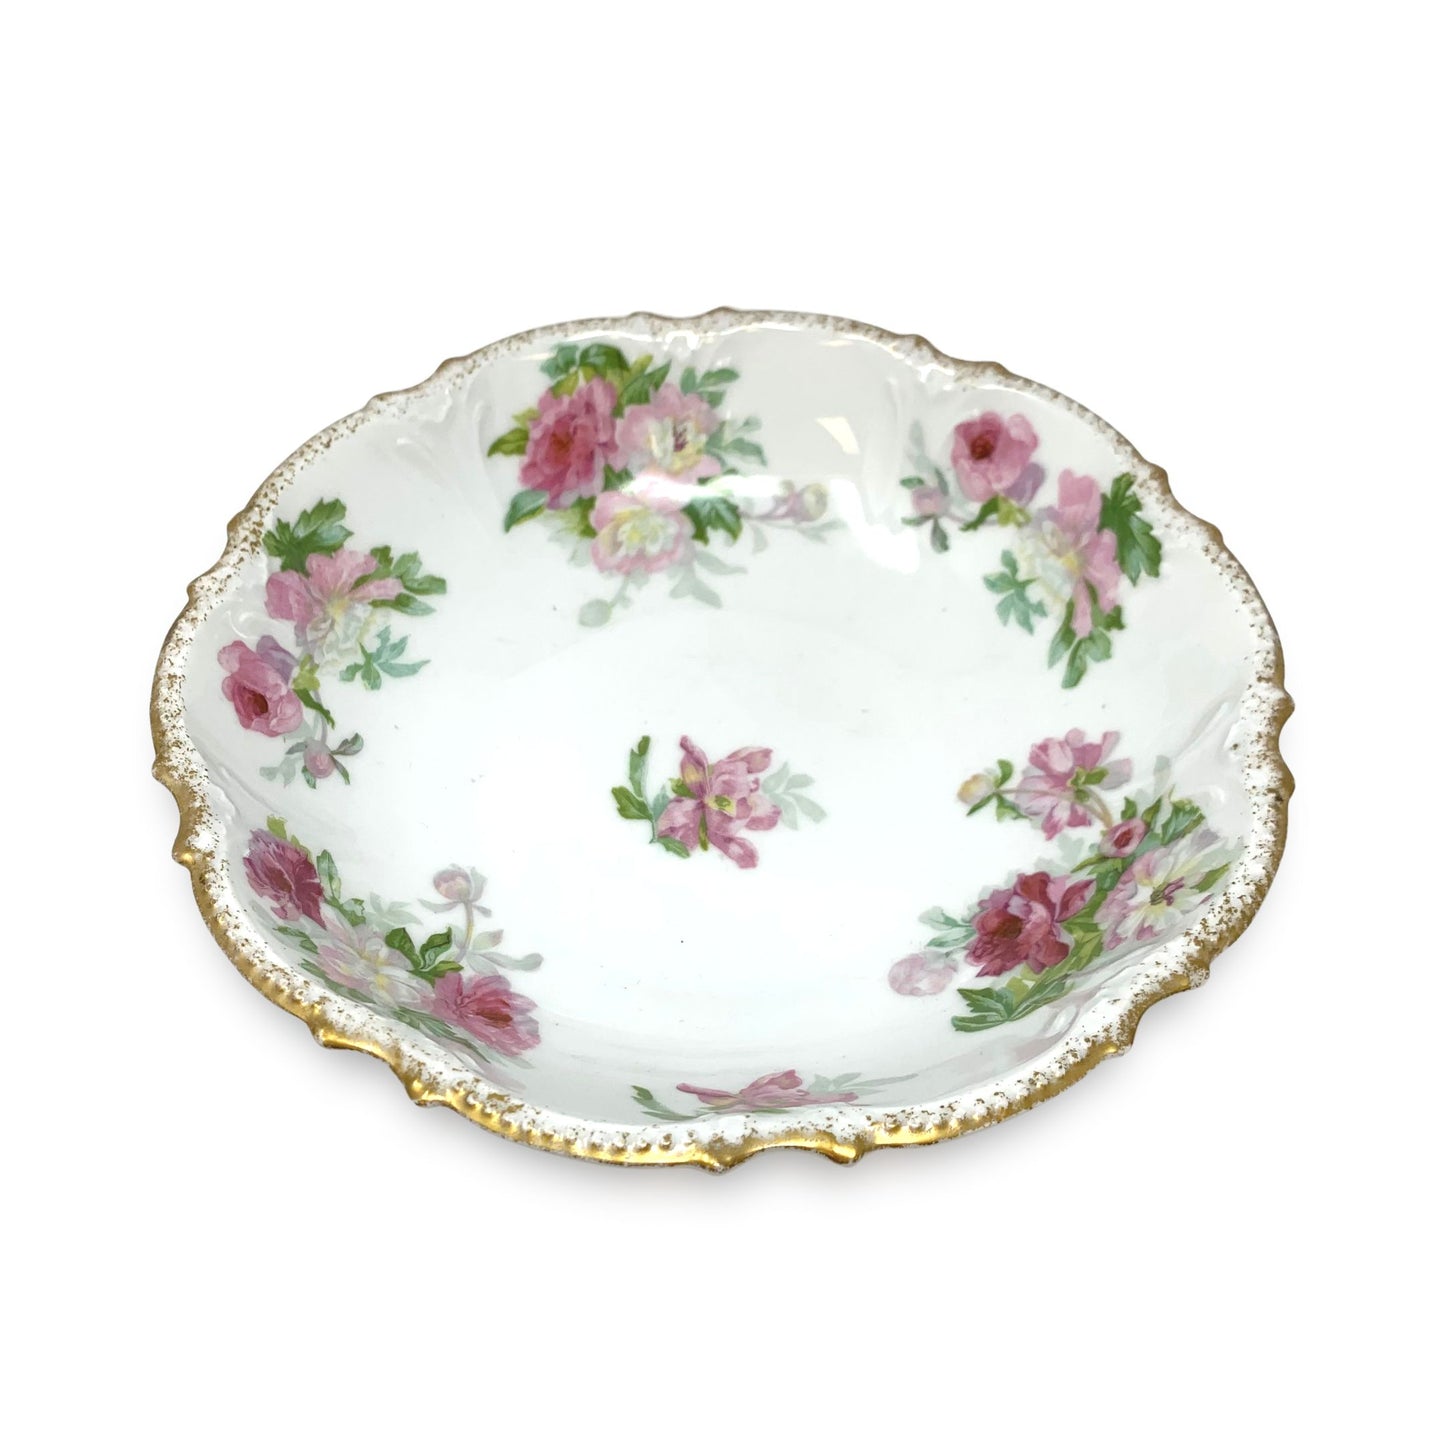 Coronet Limoges Serving Bowl With Roses & Peonies